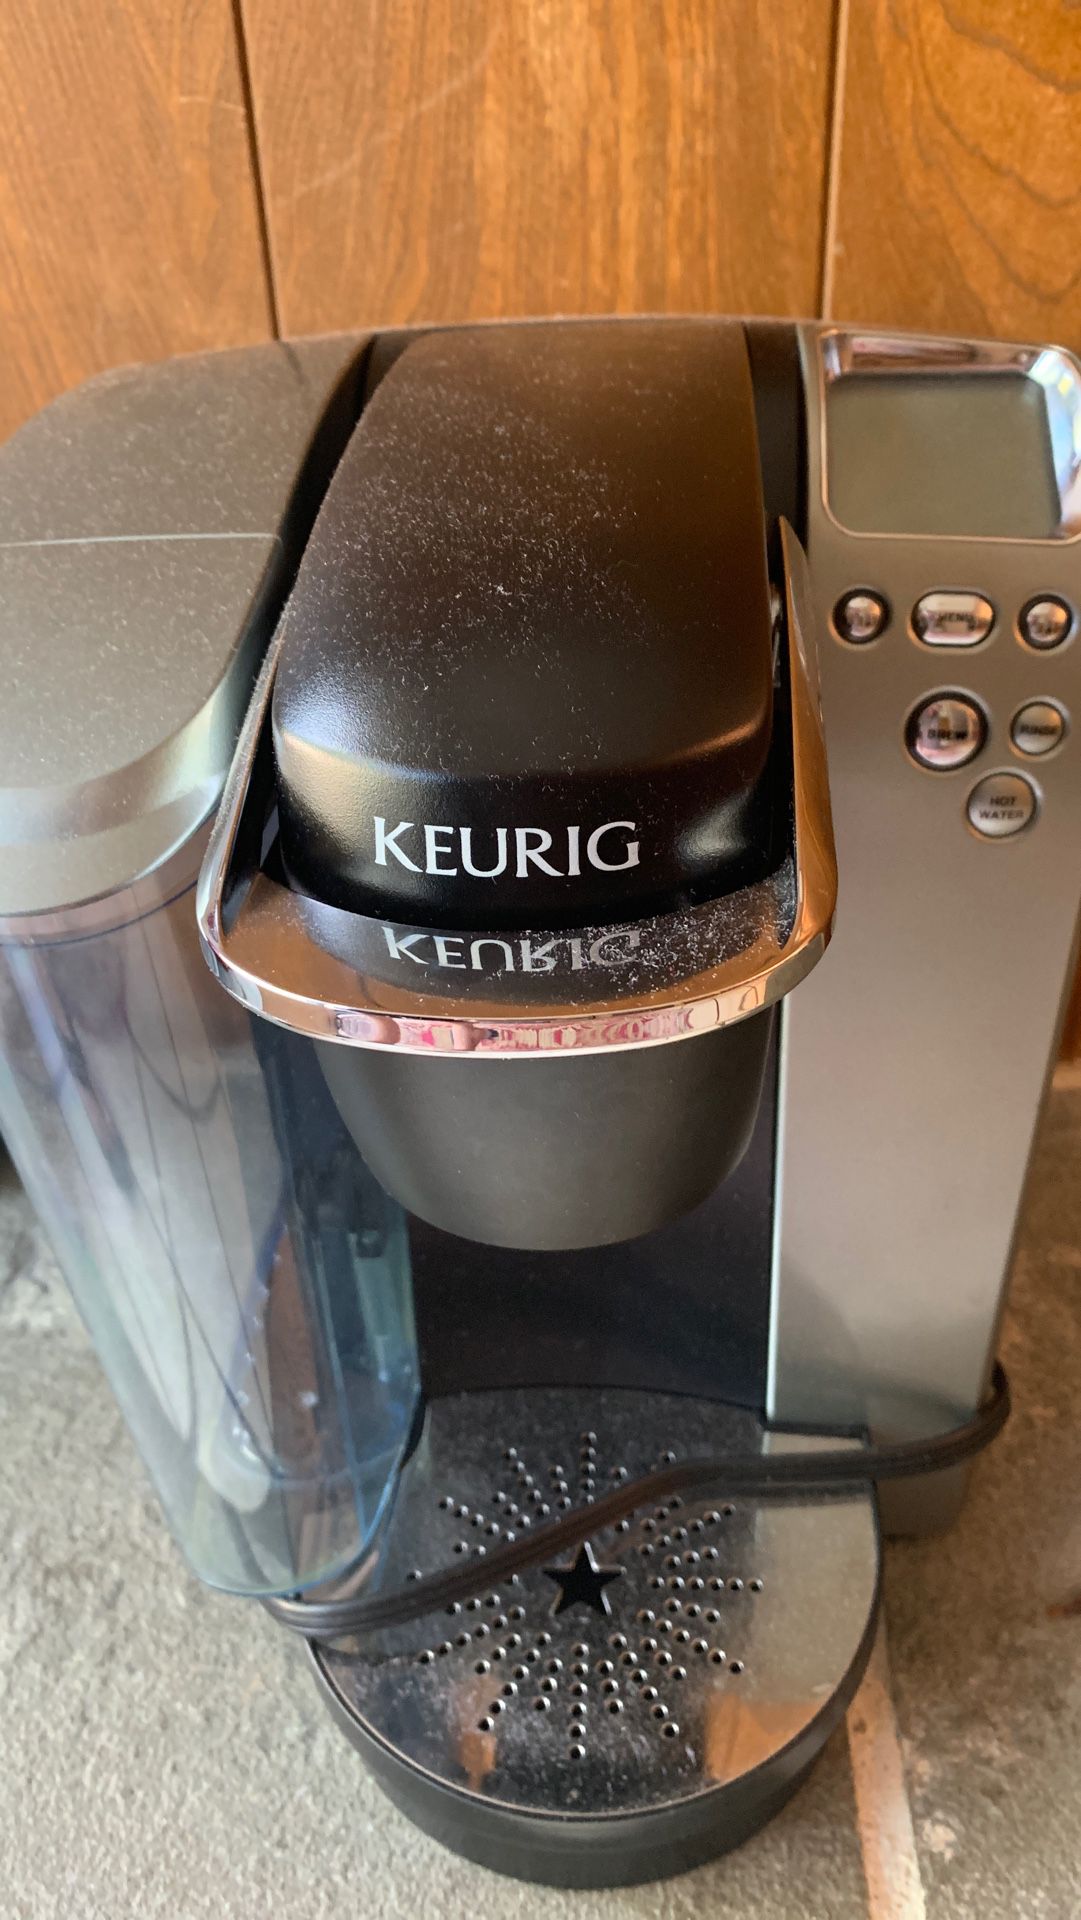 Almost new Keurig for sell for 25.00